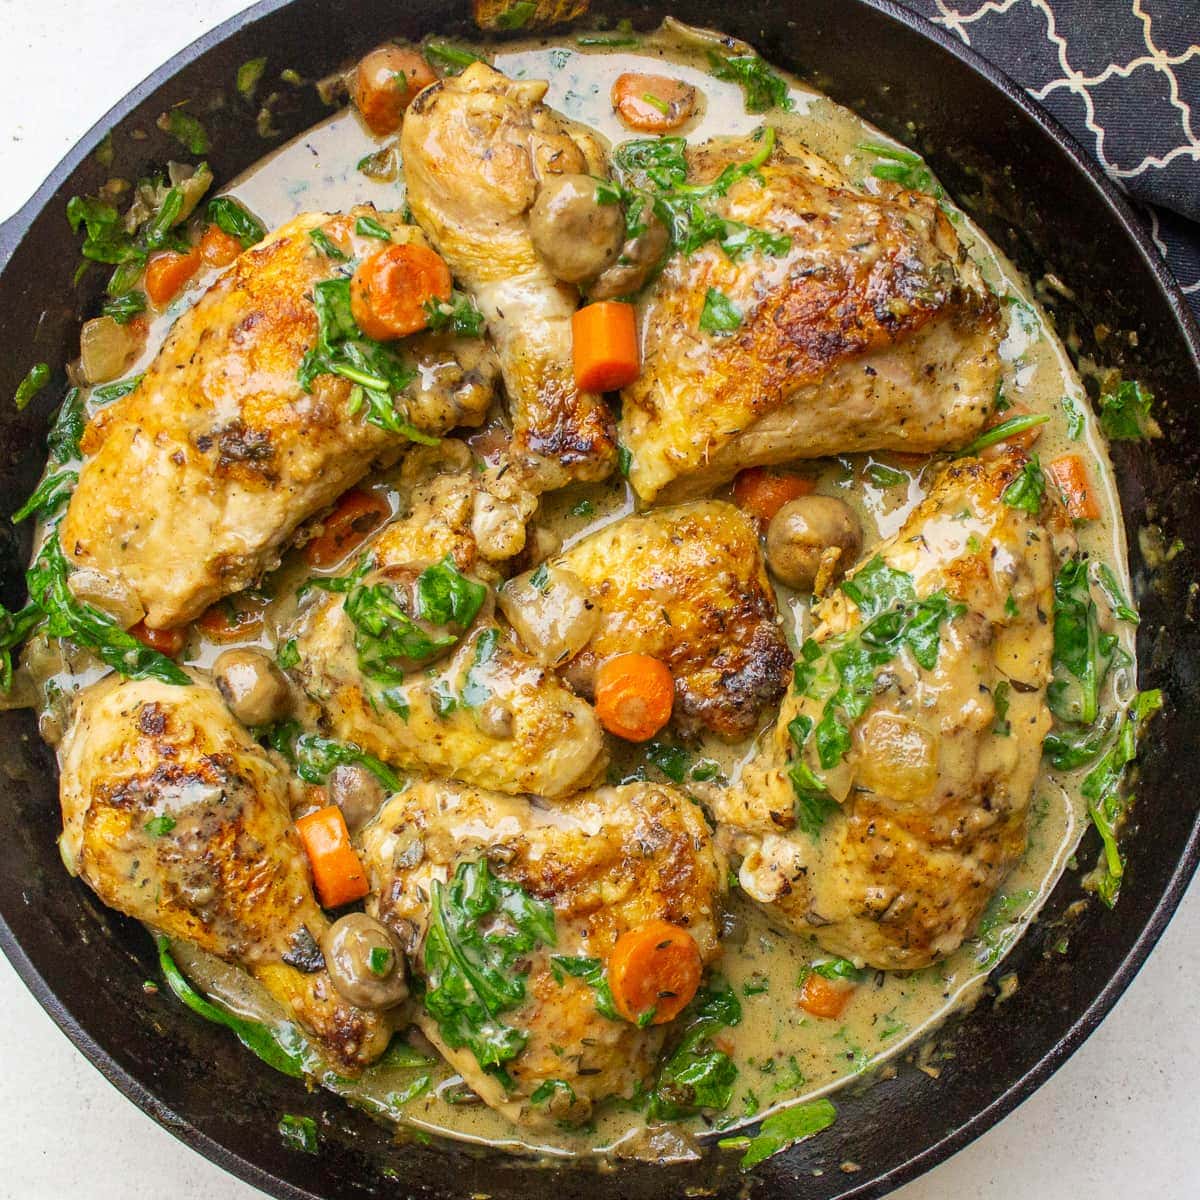 Recipe for Chicken Fricassee (Simplified)